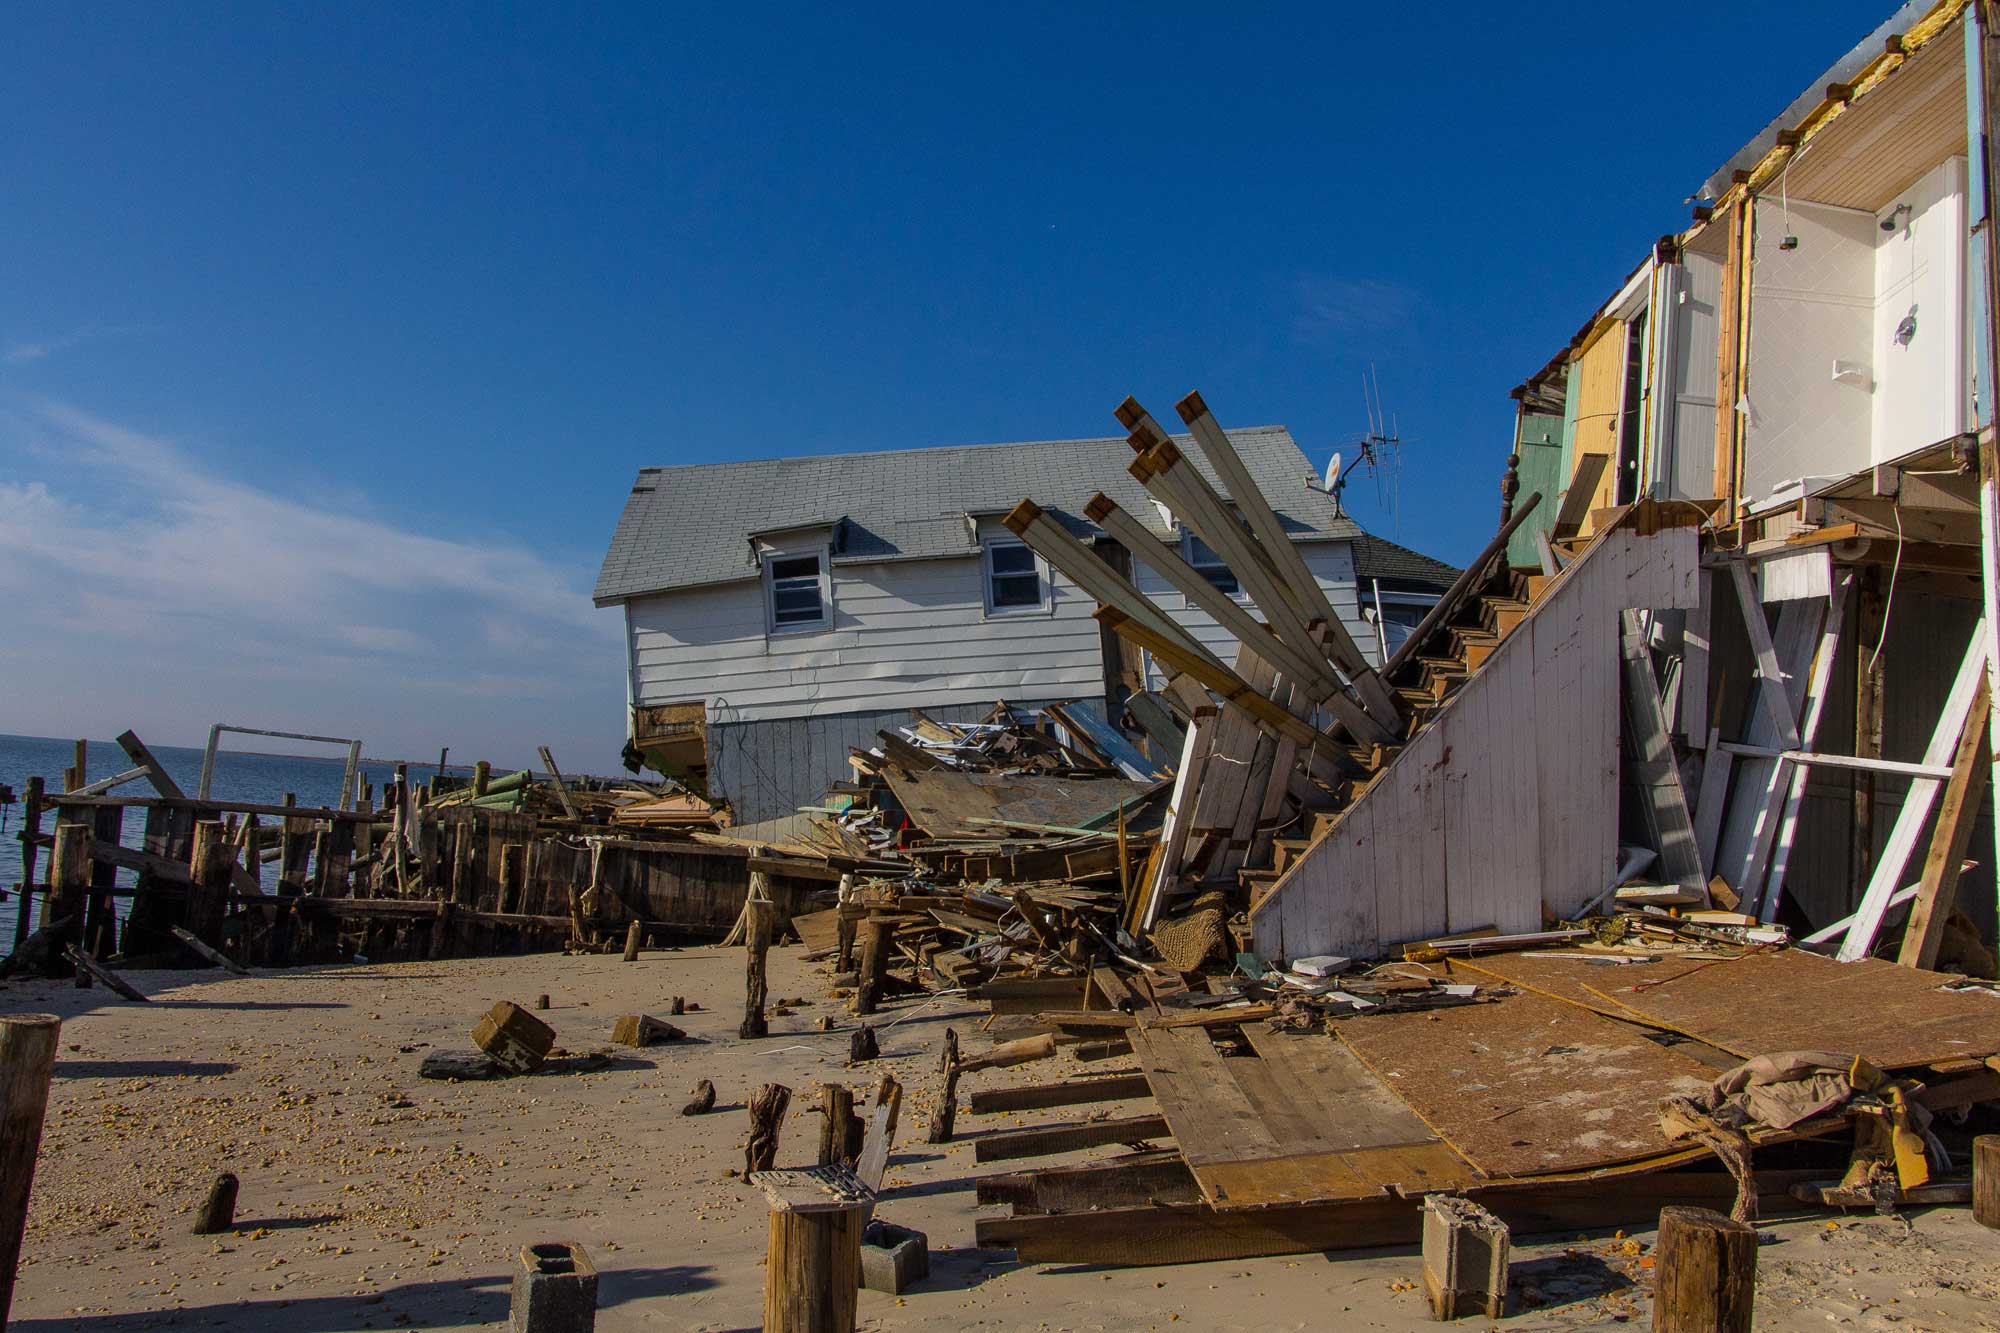 Photograph of Gandy Beach, New Jersey, following Hurricane Sandy in 2012. The photo shows houses that were built on the beach, with substantial damage on the sides that face the water.